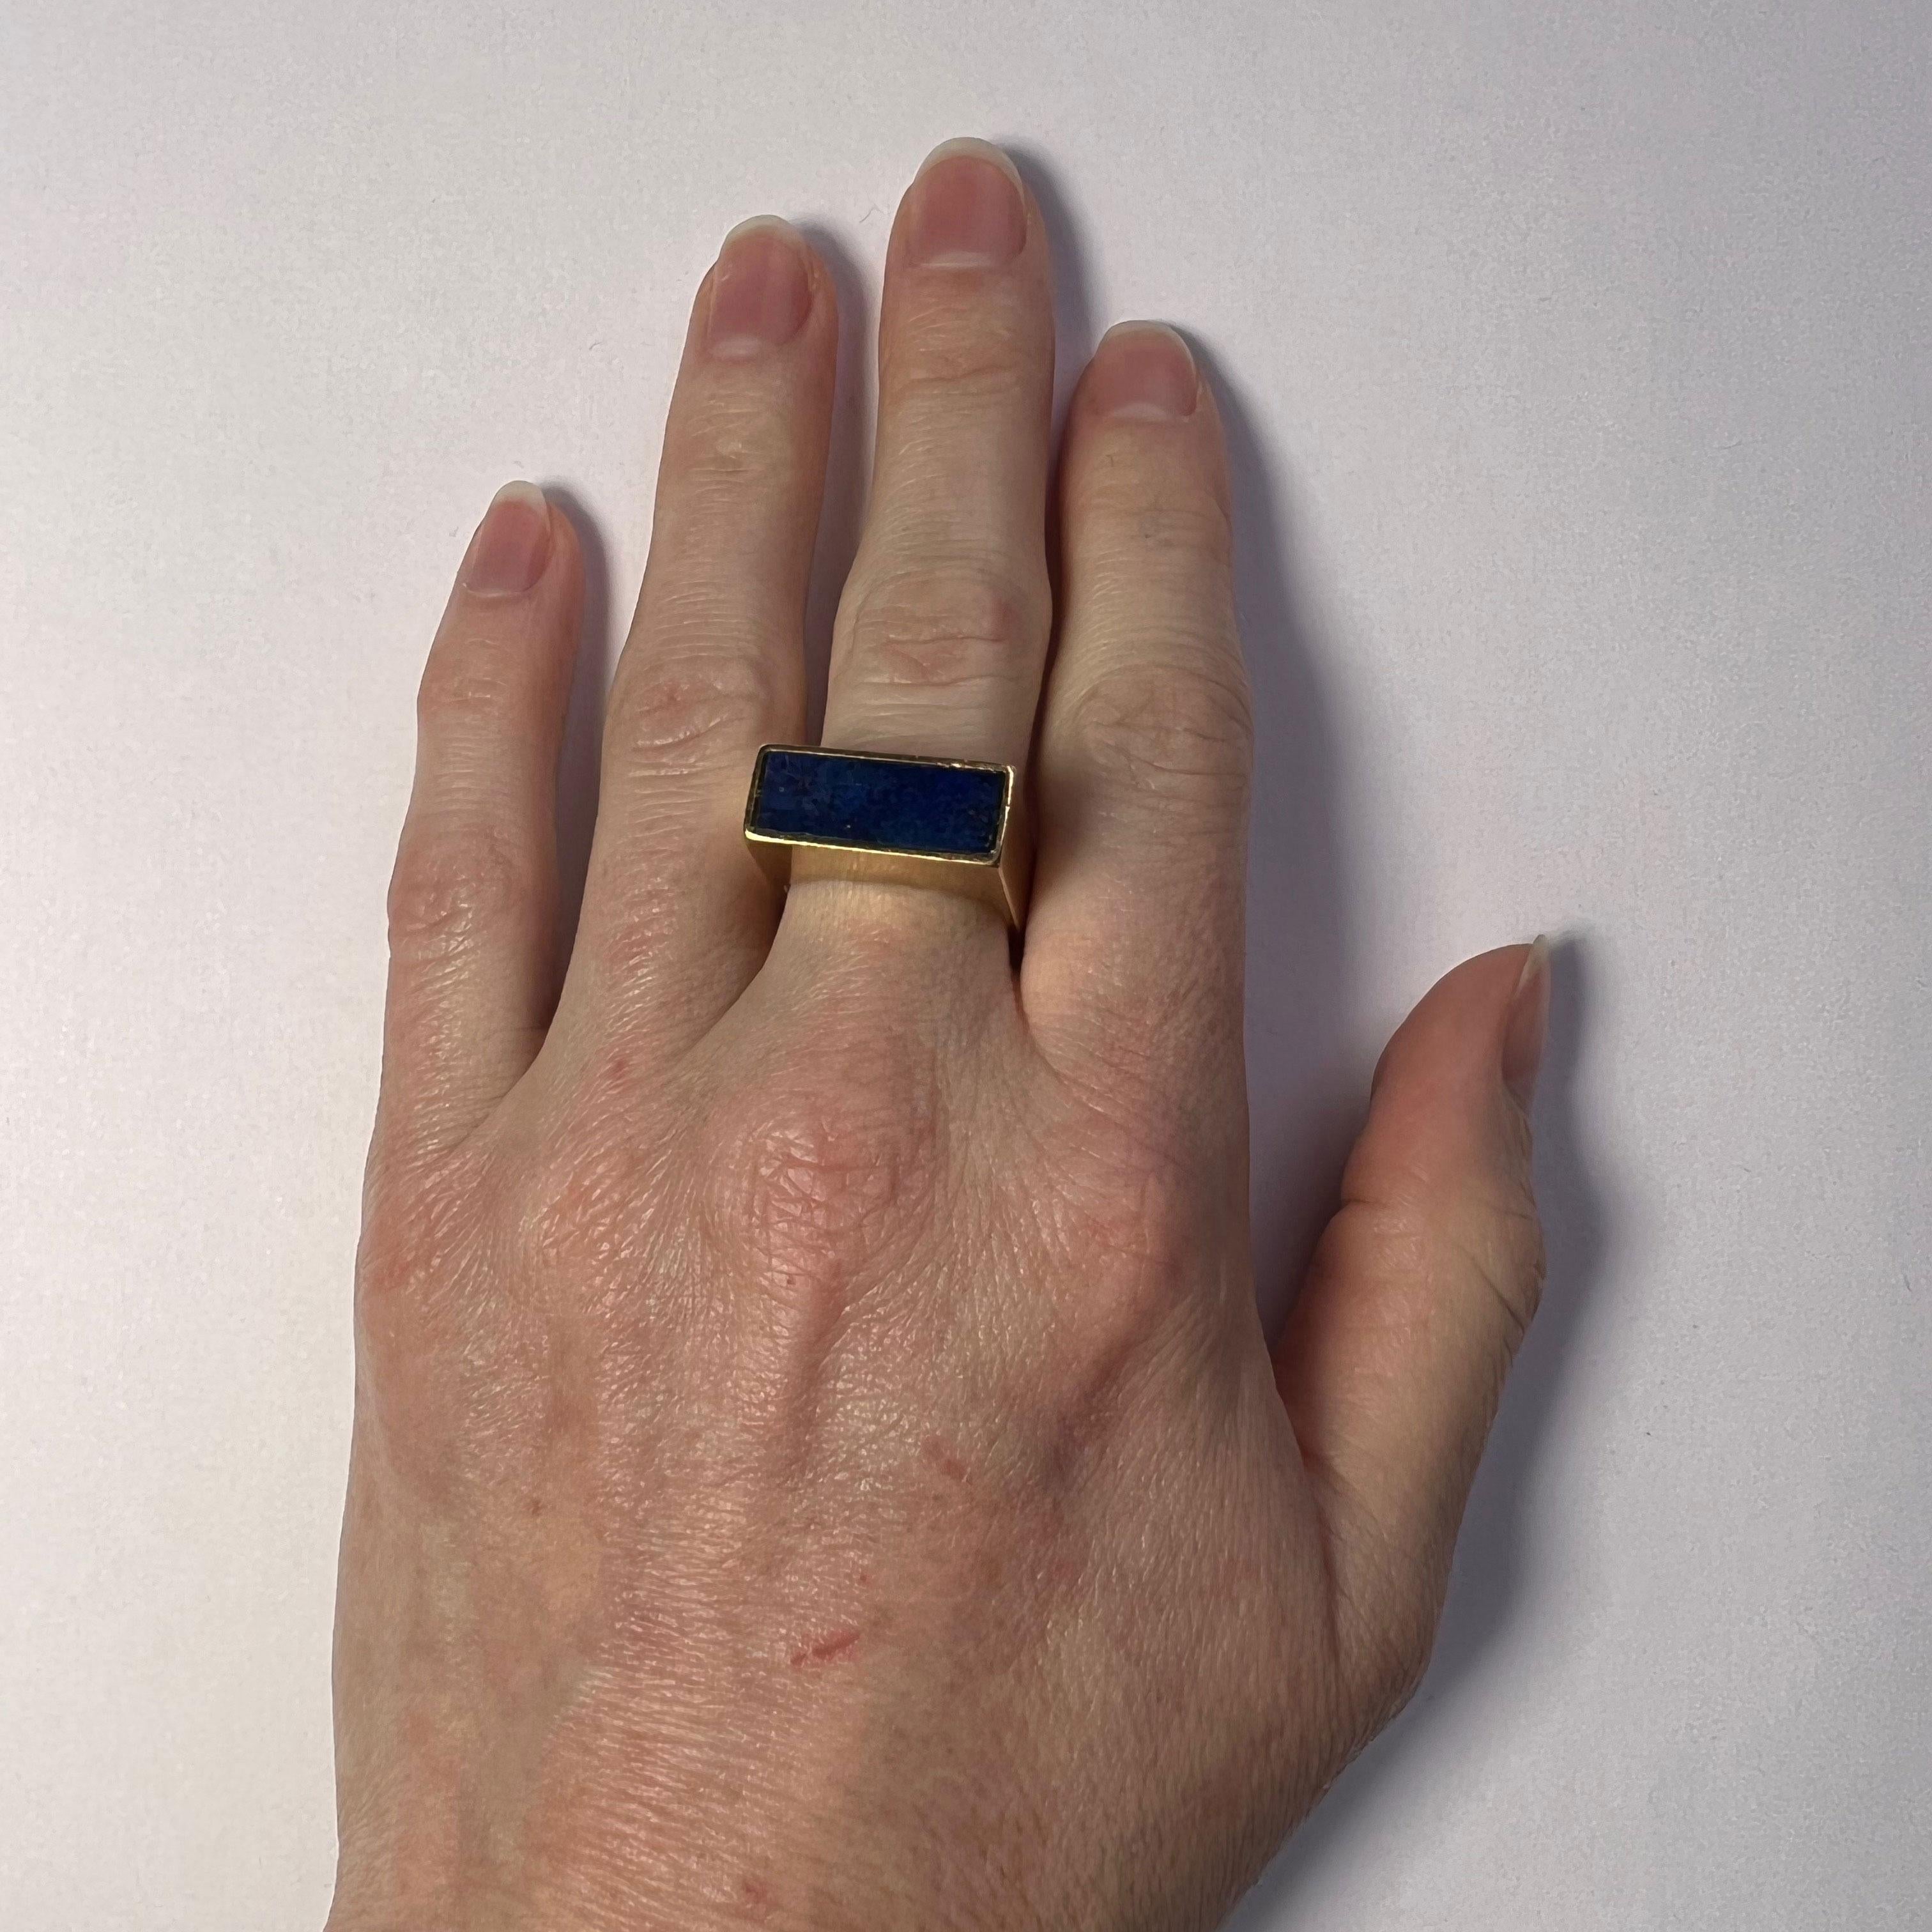 An architectural modernist 18 karat ring set with a rectangular panel of lapis lazuli to the head of the ring.

The outline of this ring is square, meaning that this ring may also function as a sculpture when not being worn.

Stamped 18K for 18